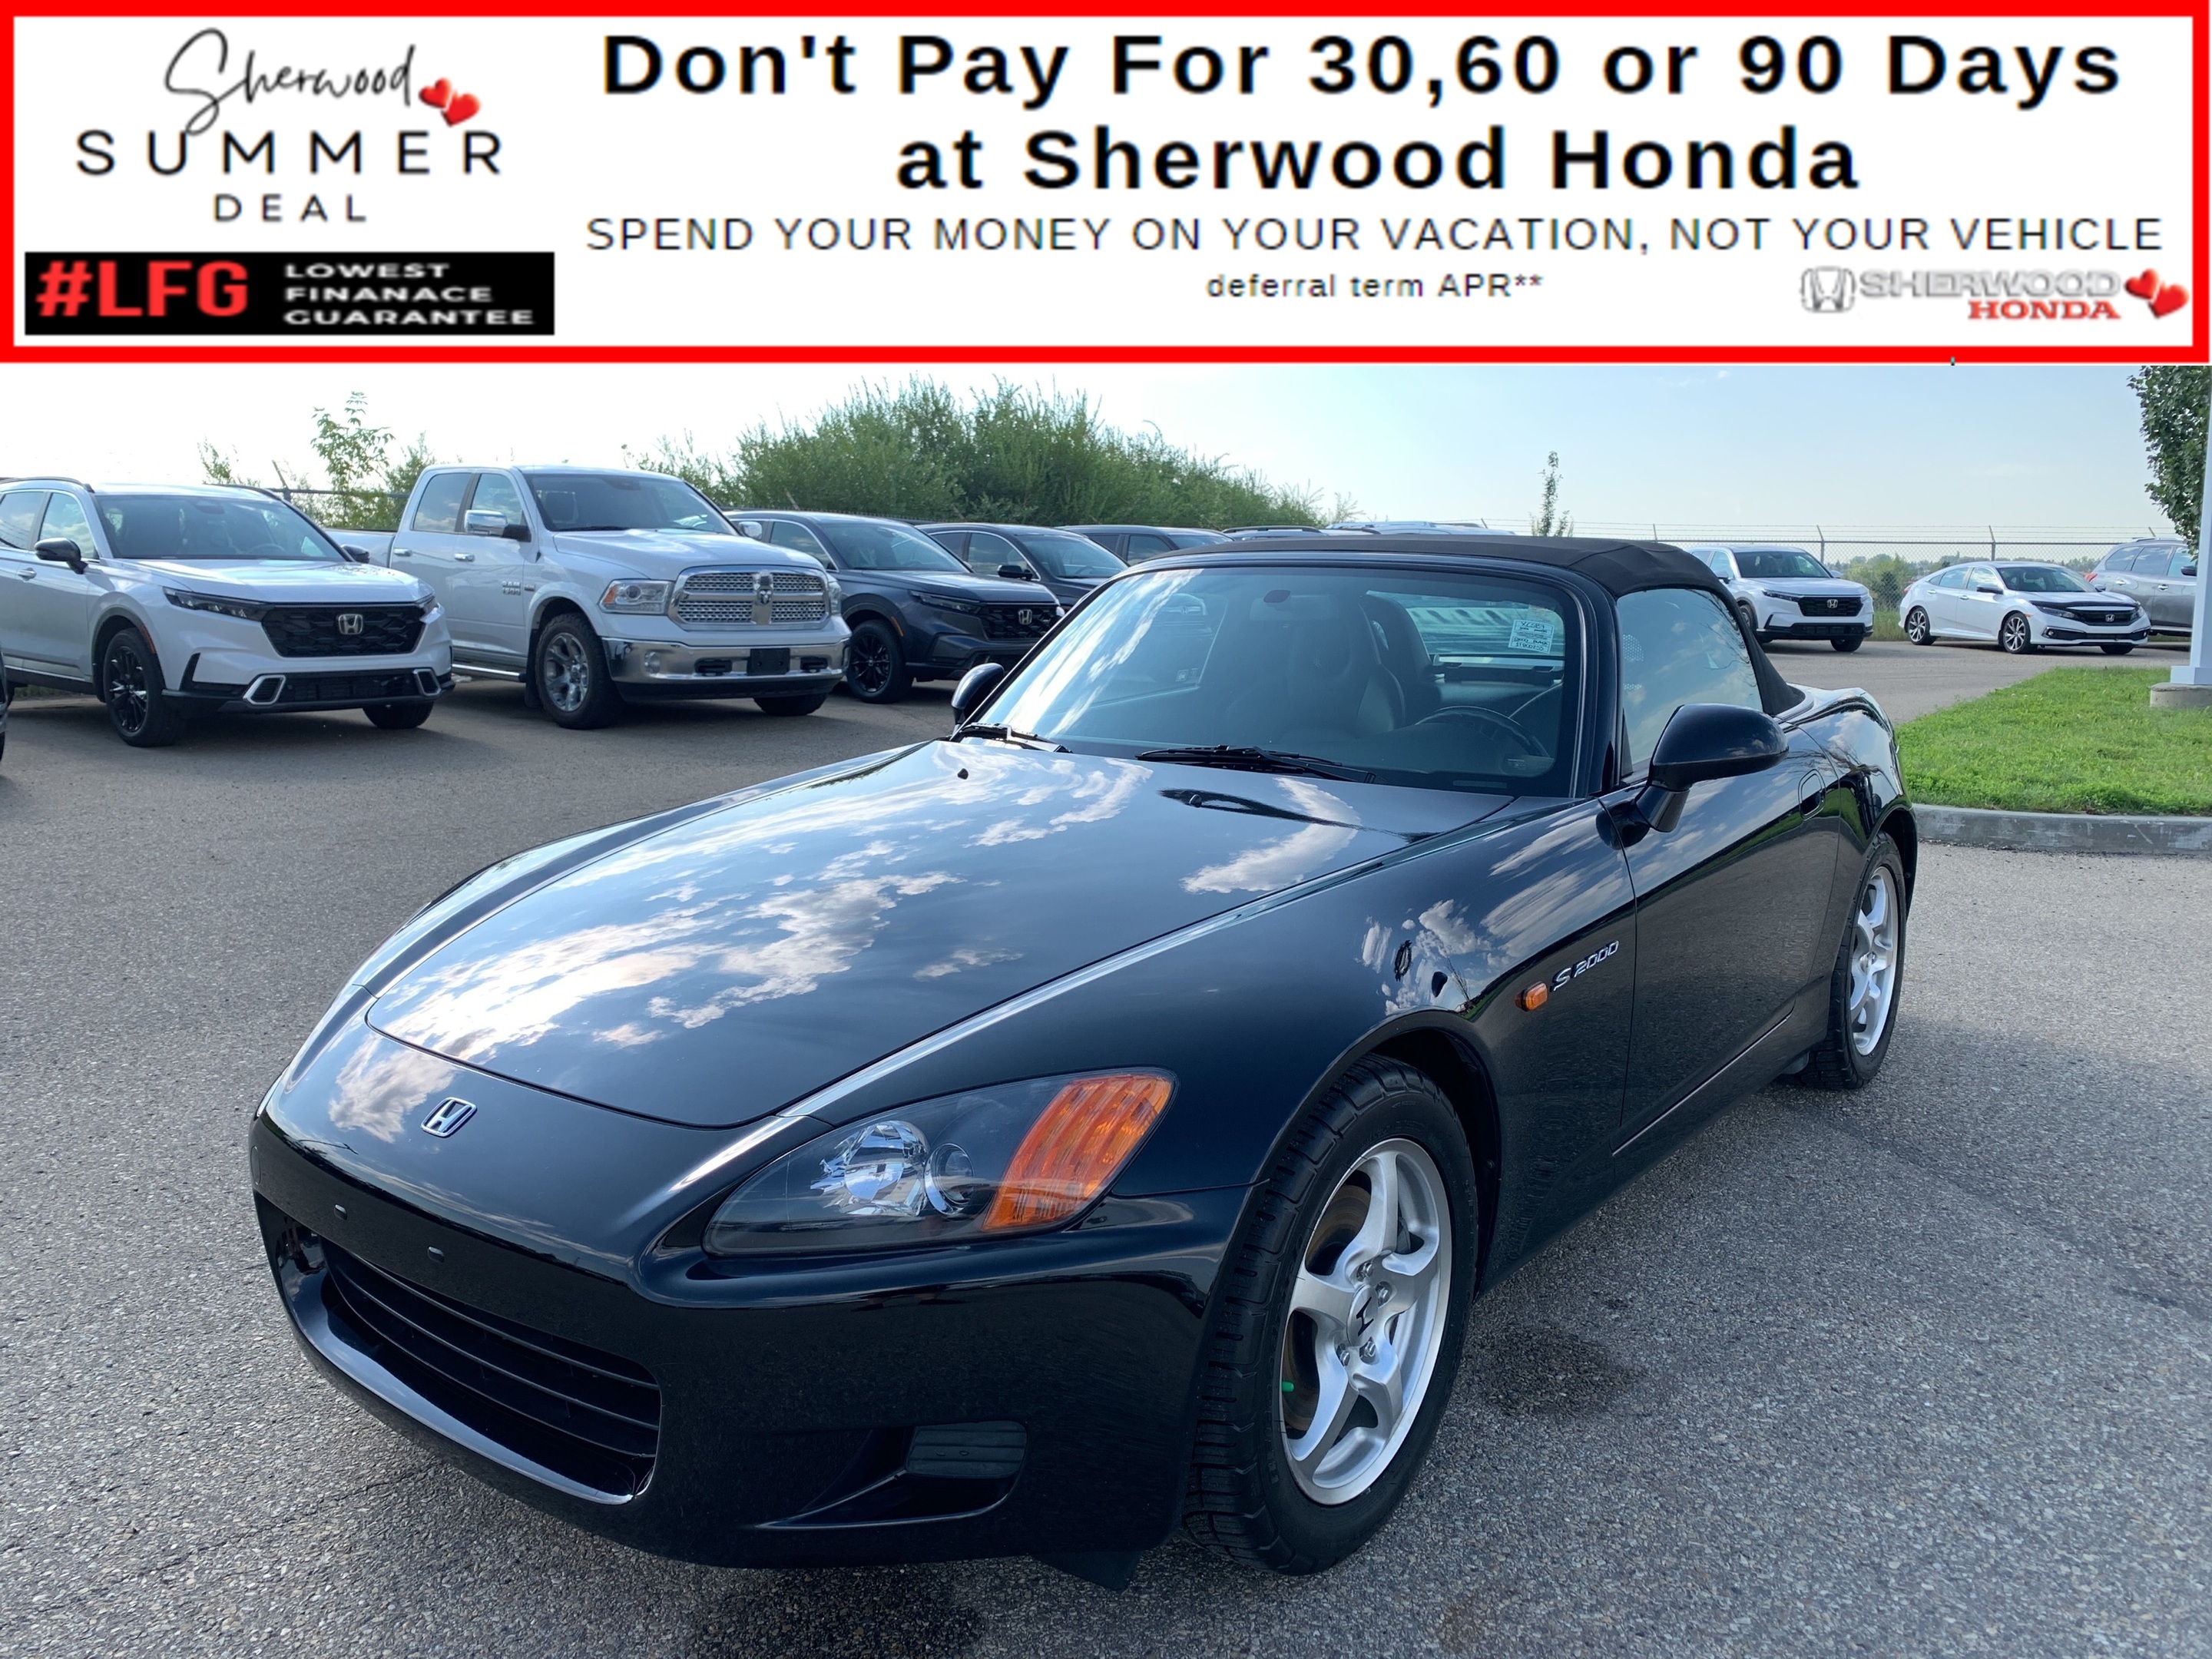 2001 Honda S2000 2dr Convertible | LOW KMS | LEATHER | NO ACCIDENTS